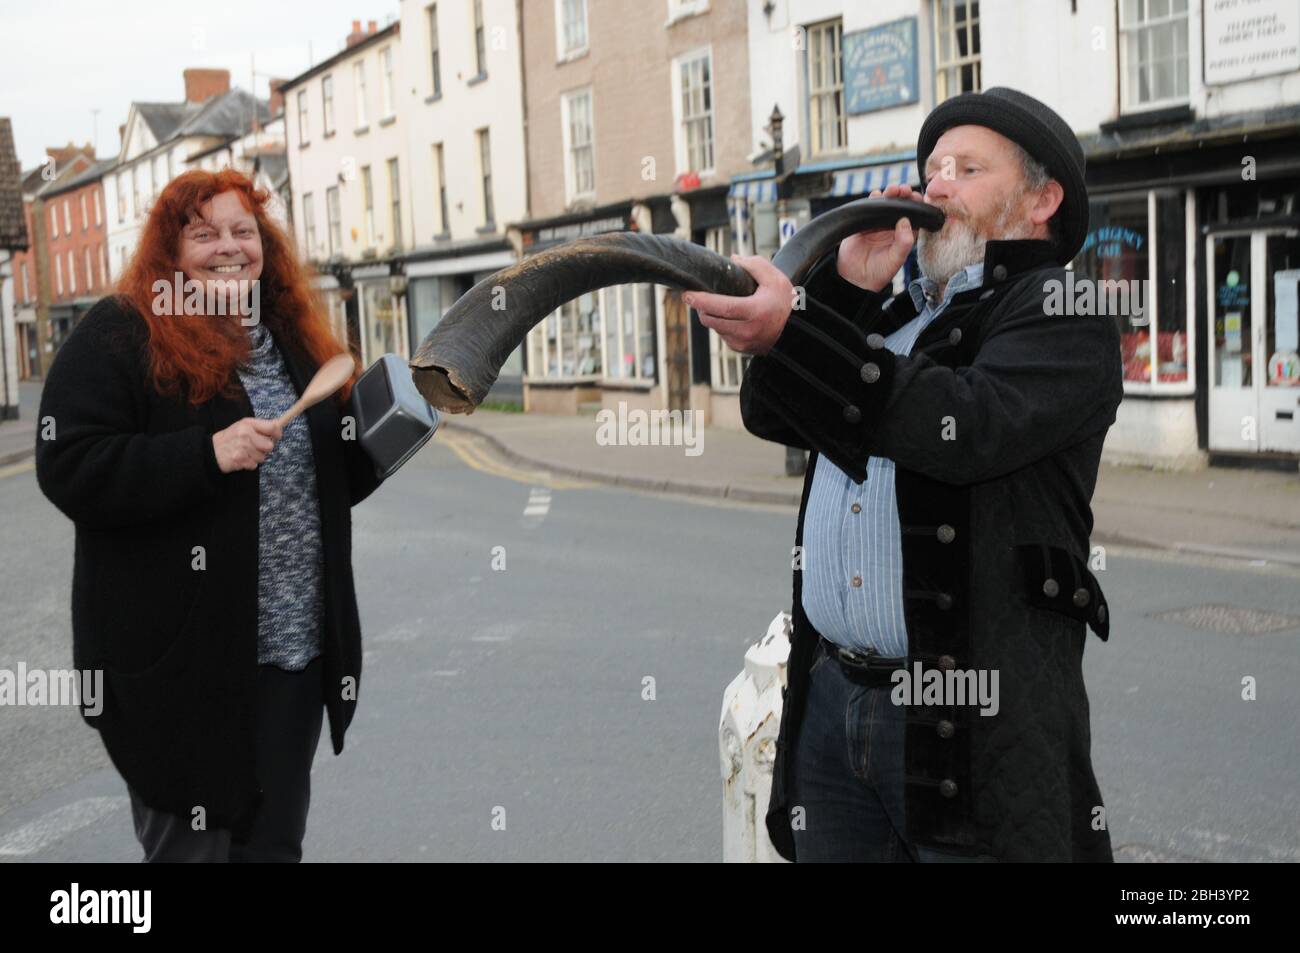 Kington, Herefordshire, UK. 23rd Apr, 2020. Kington resident Mark Jackson plays a Kudo horn in the town's High Street. A kudu horn is from an animal called a Kudu which is a species of antelope. Mark plays the instrument alongside wife Sandy to show support for key workers during the 'Clap for Carers' campaign during the Coronavirus/ Covid 19 Pandemic. Credit: Andrew Compton/Alamy Live News Stock Photo